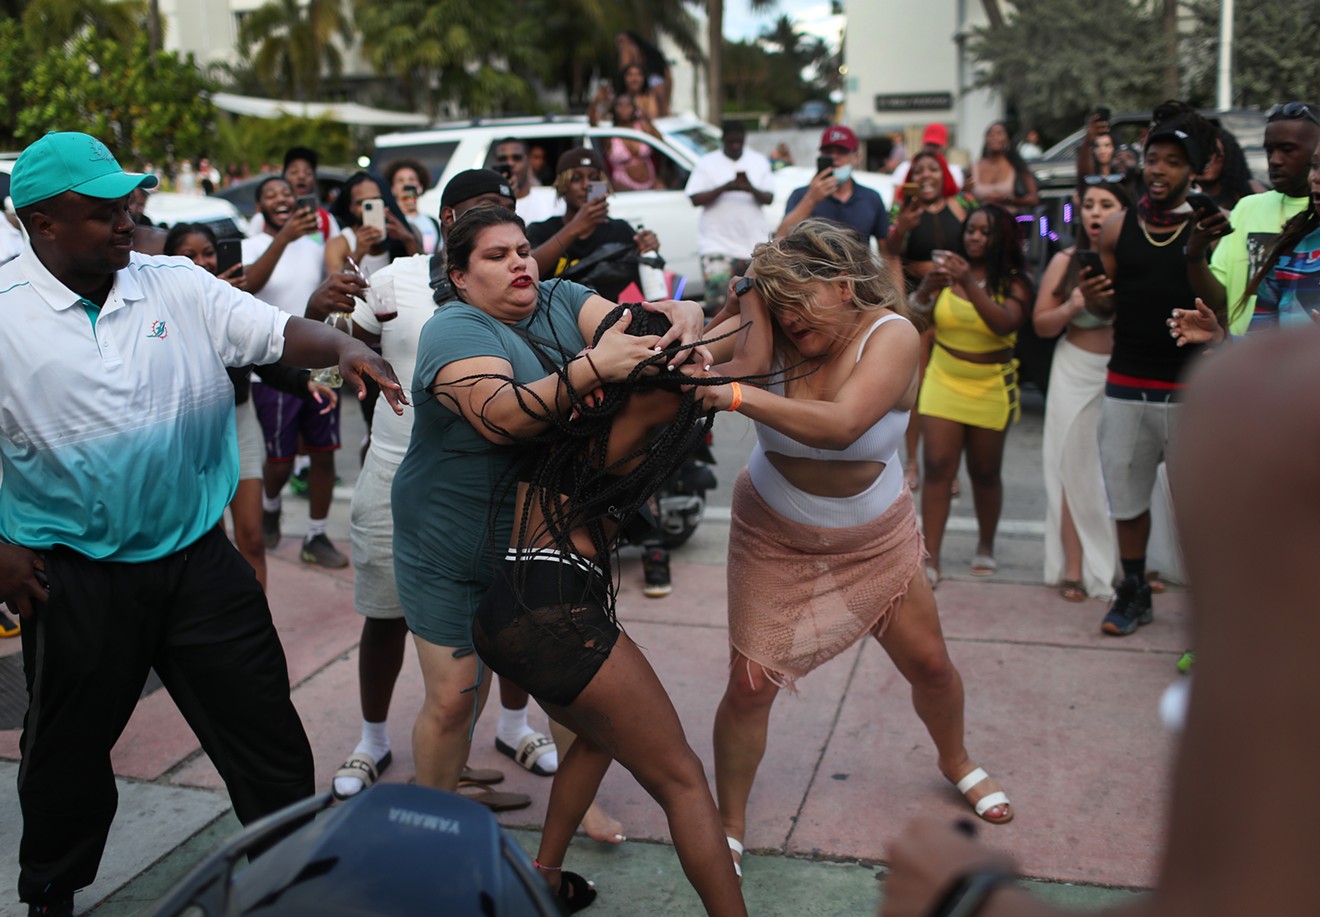 Women fight on the street near Ocean Drive on March 19, 2021 in Miami Beach, Florida.